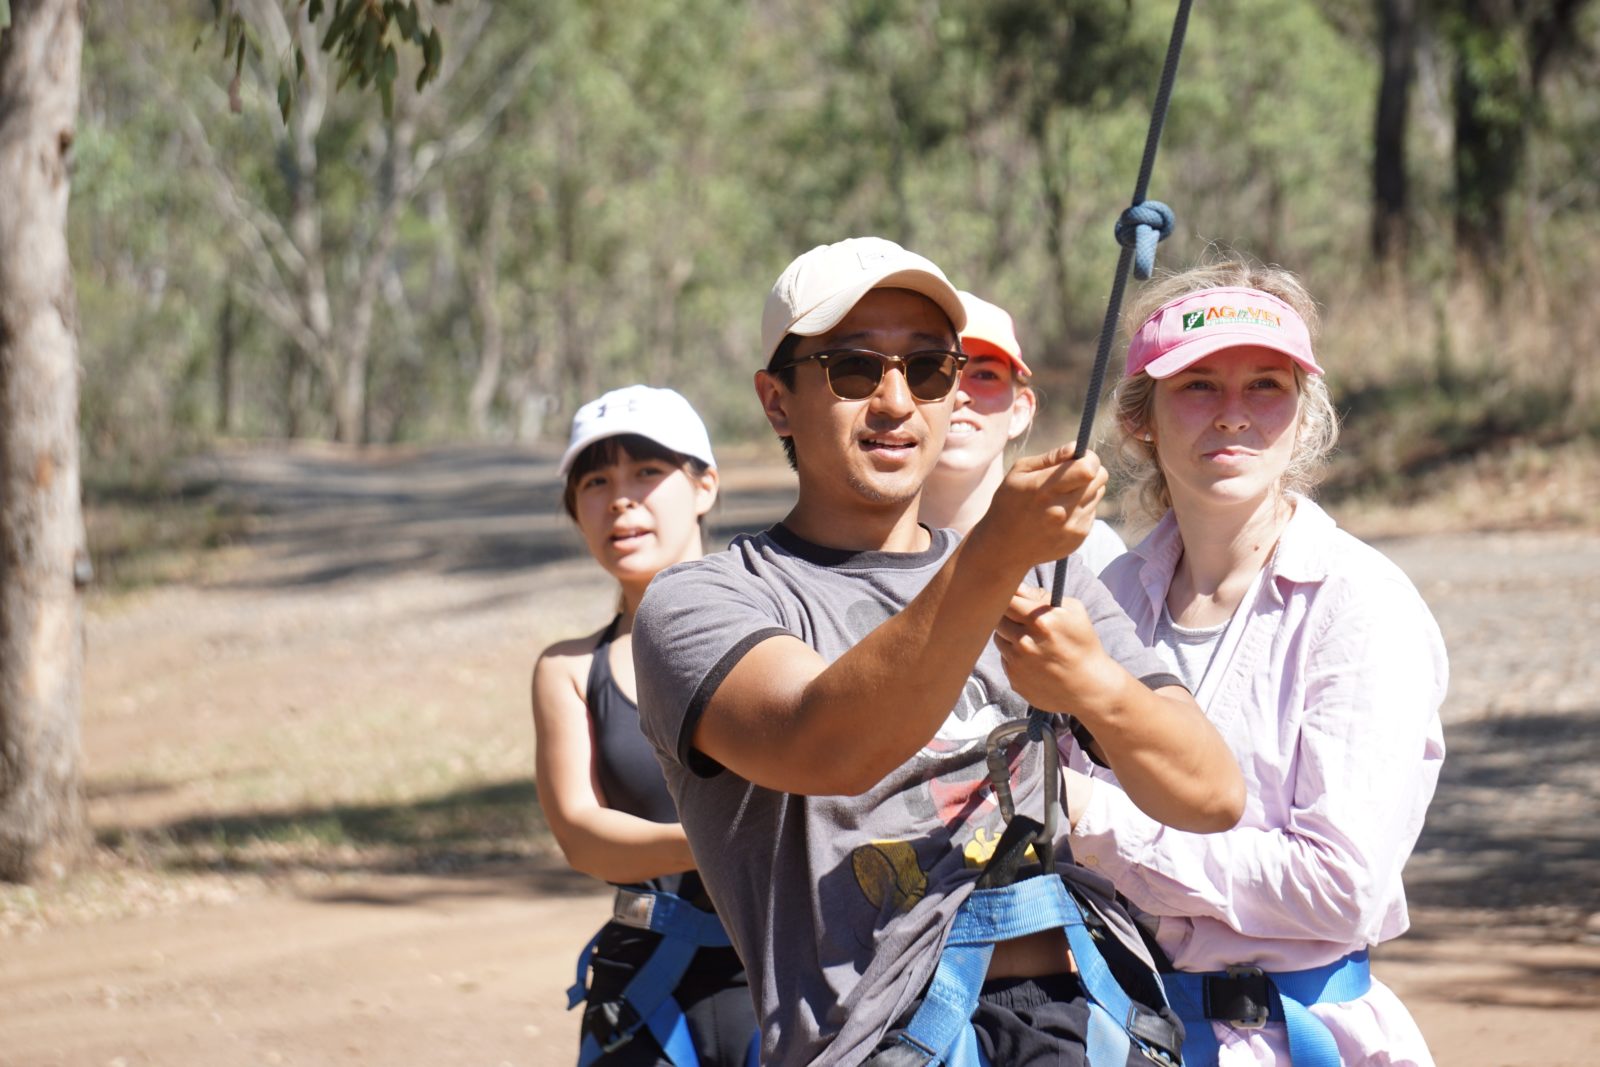 Diverse range of facilitated outdoor activities